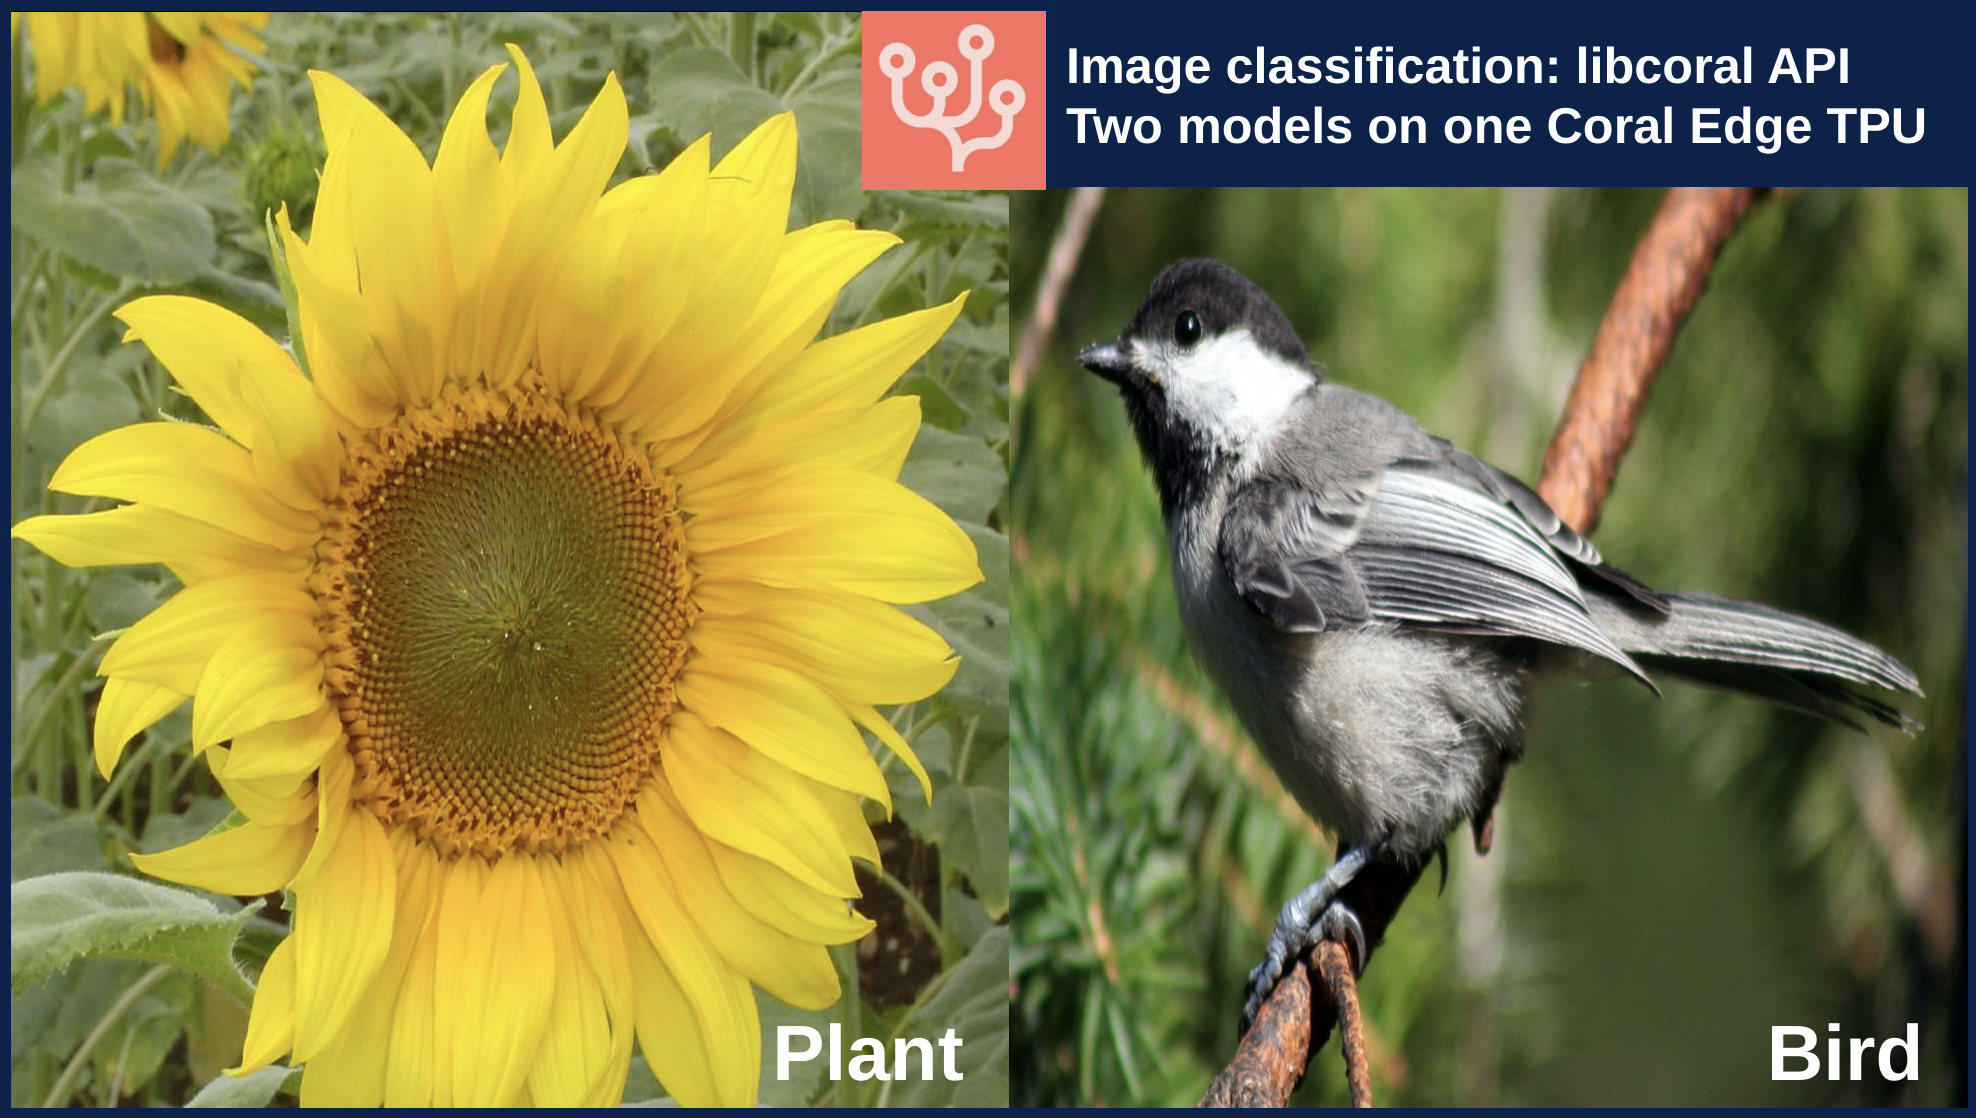 libcoral API image classification example